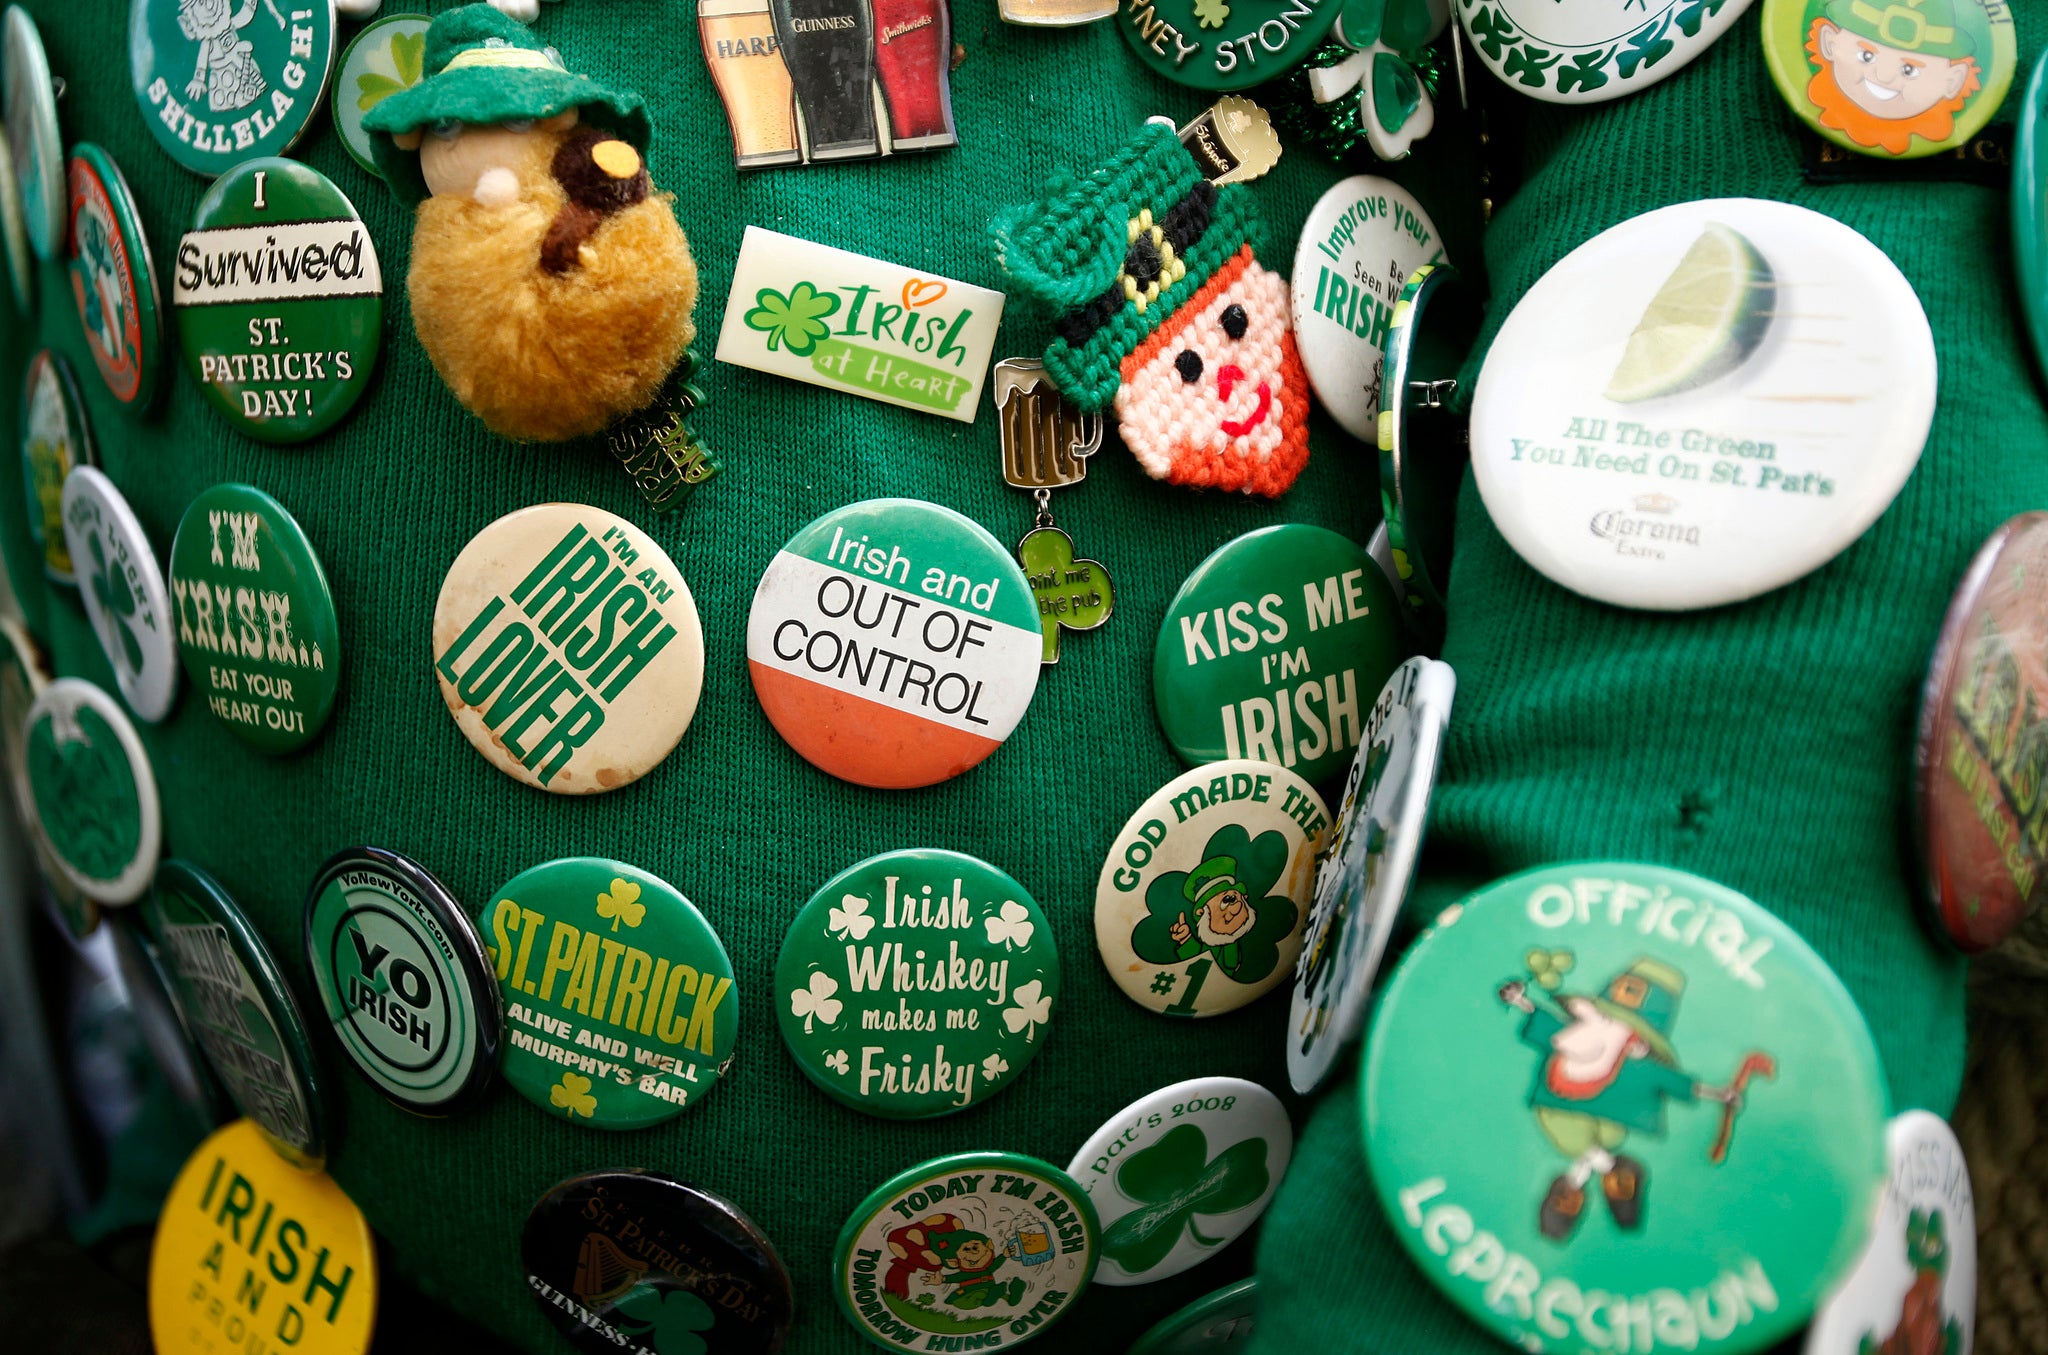 St. Patrick's Day coat pins adorn the jacket of Dennis Dunn of New York as he watches the 251st annual St. Patrick's Day Parade in New York, March 17, 2012.